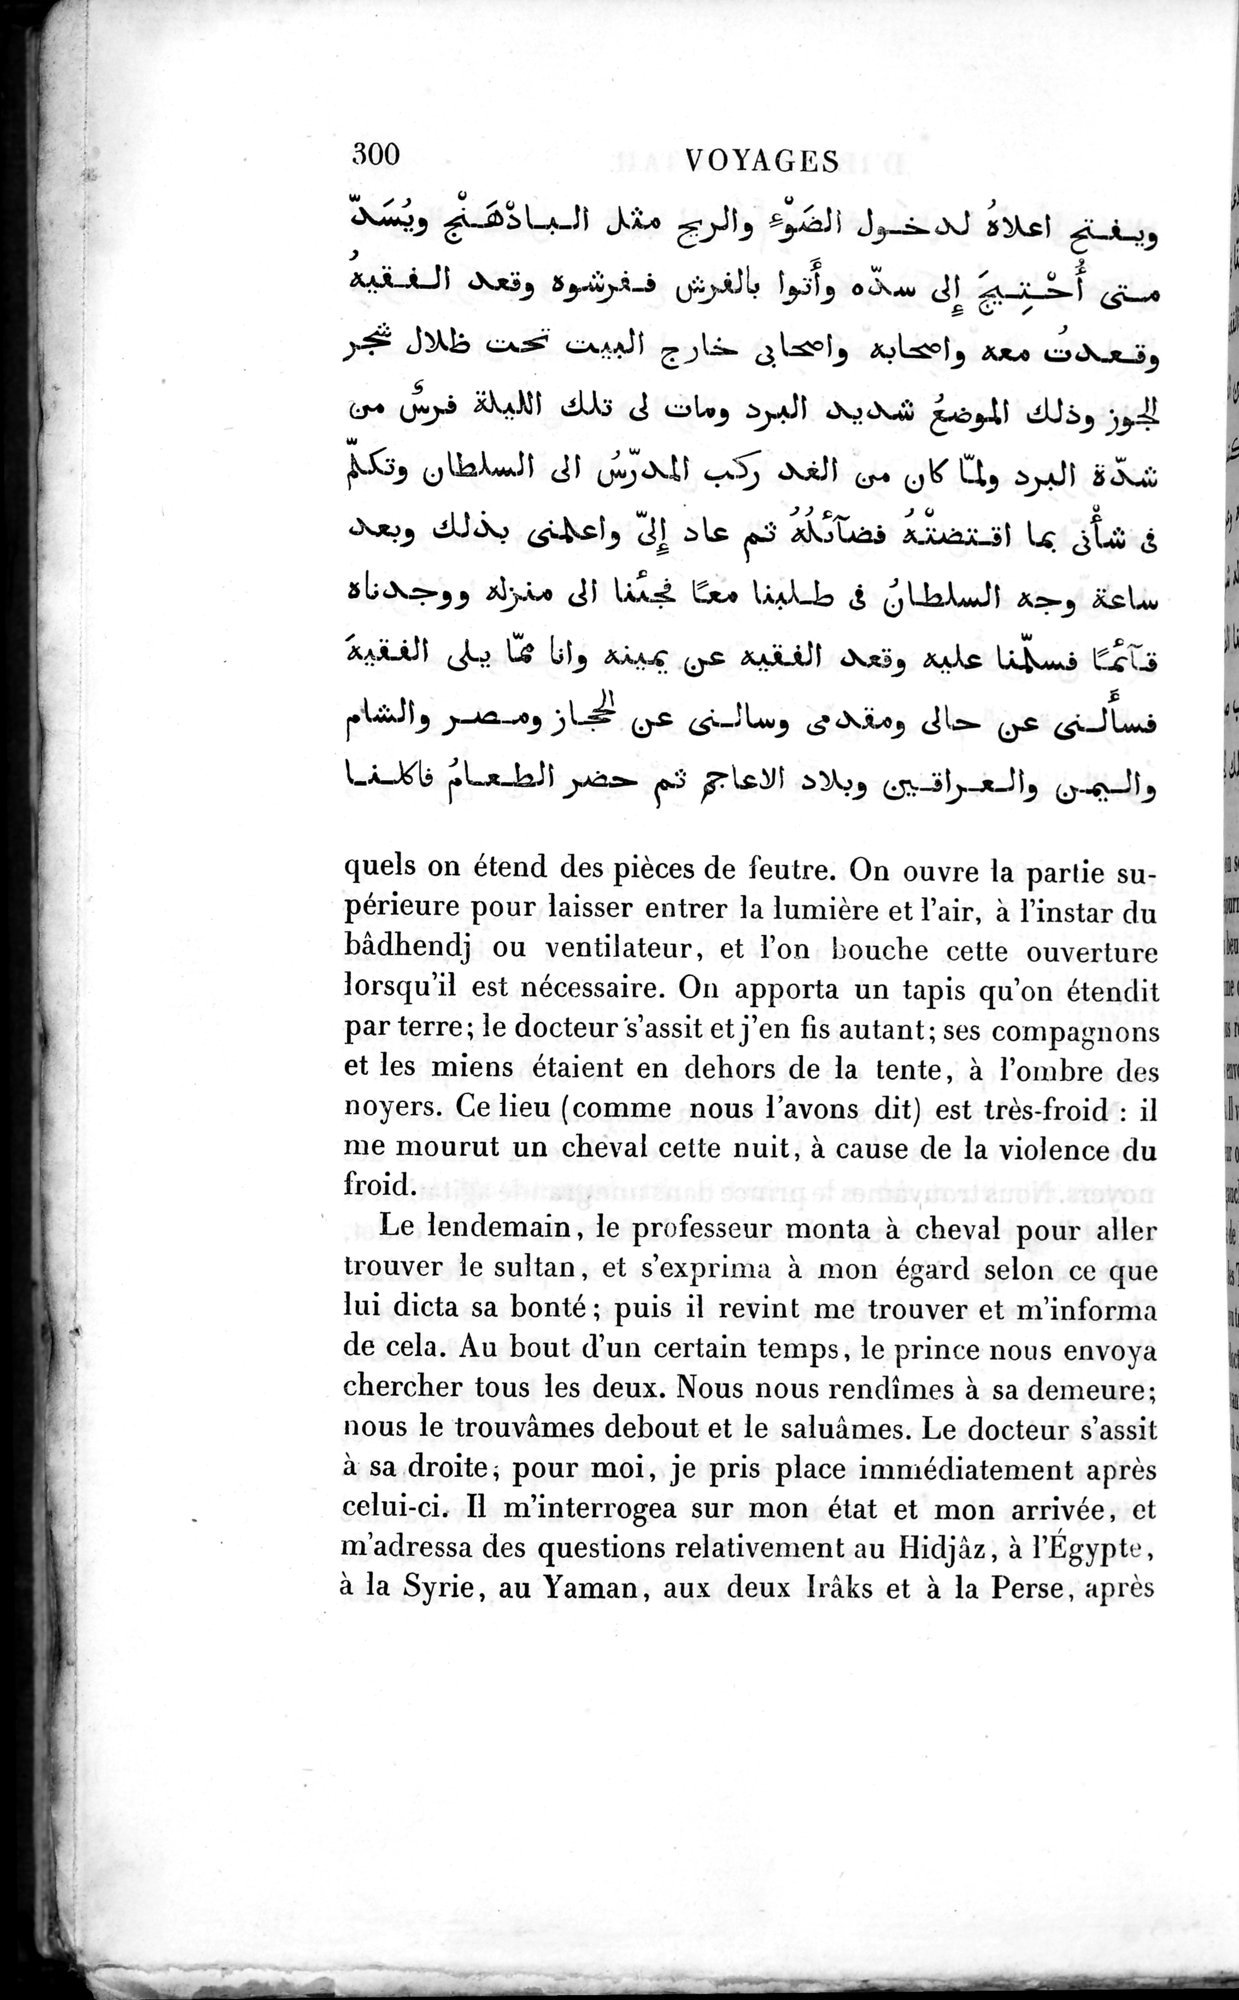 Voyages d'Ibn Batoutah : vol.2 / Page 328 (Grayscale High Resolution Image)